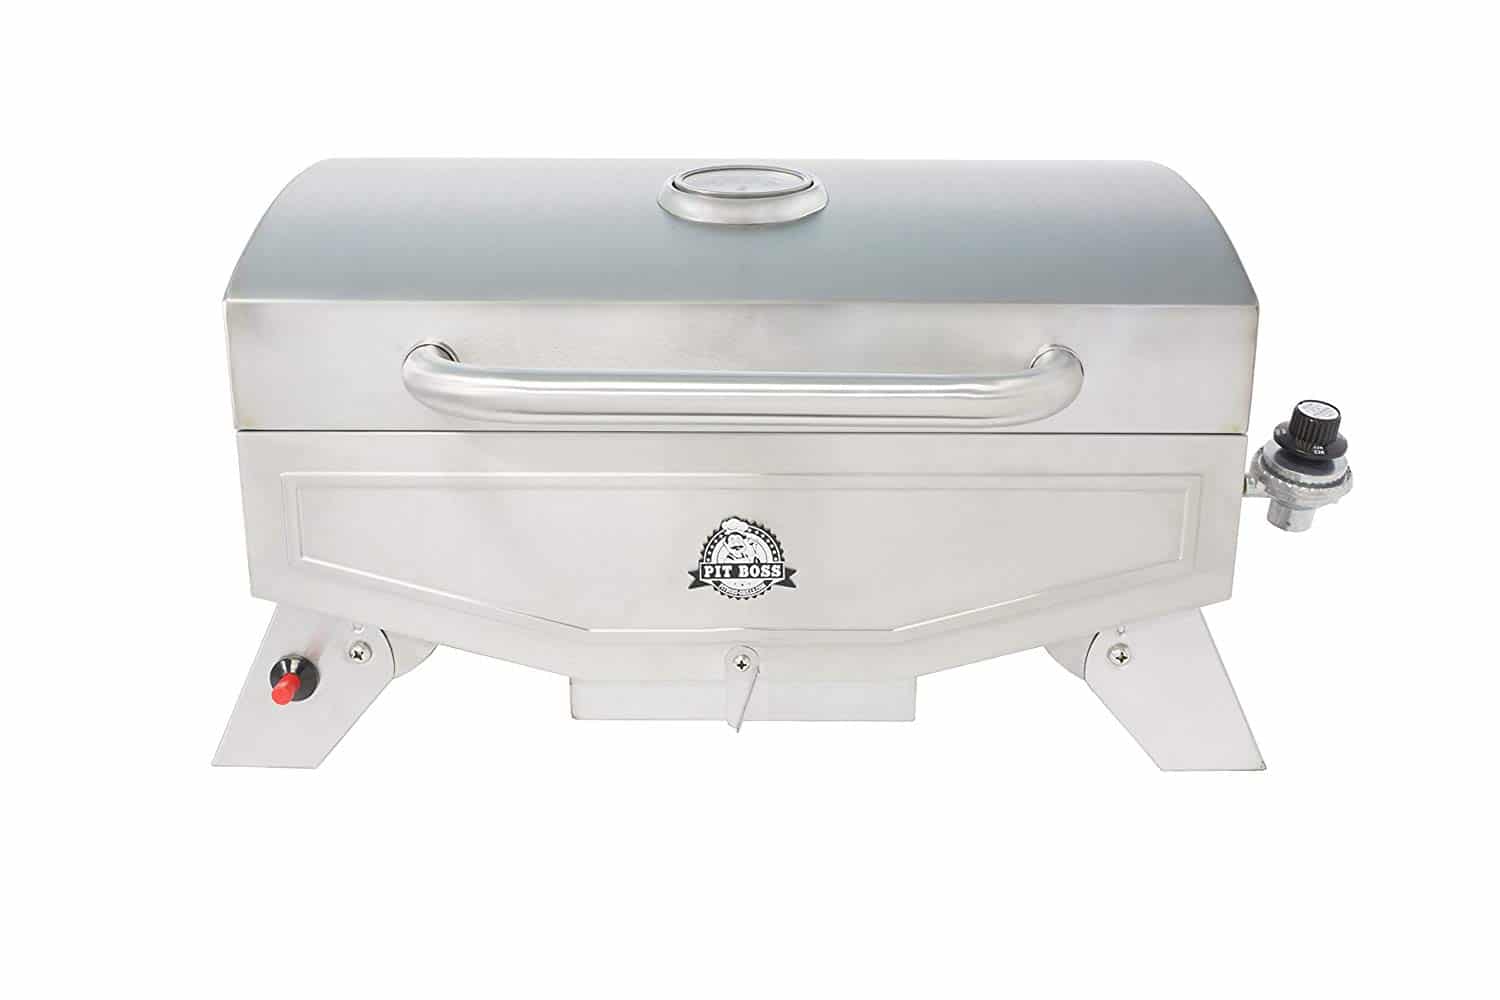 Pit Boss 75284 Stainless Steel 1-Burner Gas Grill